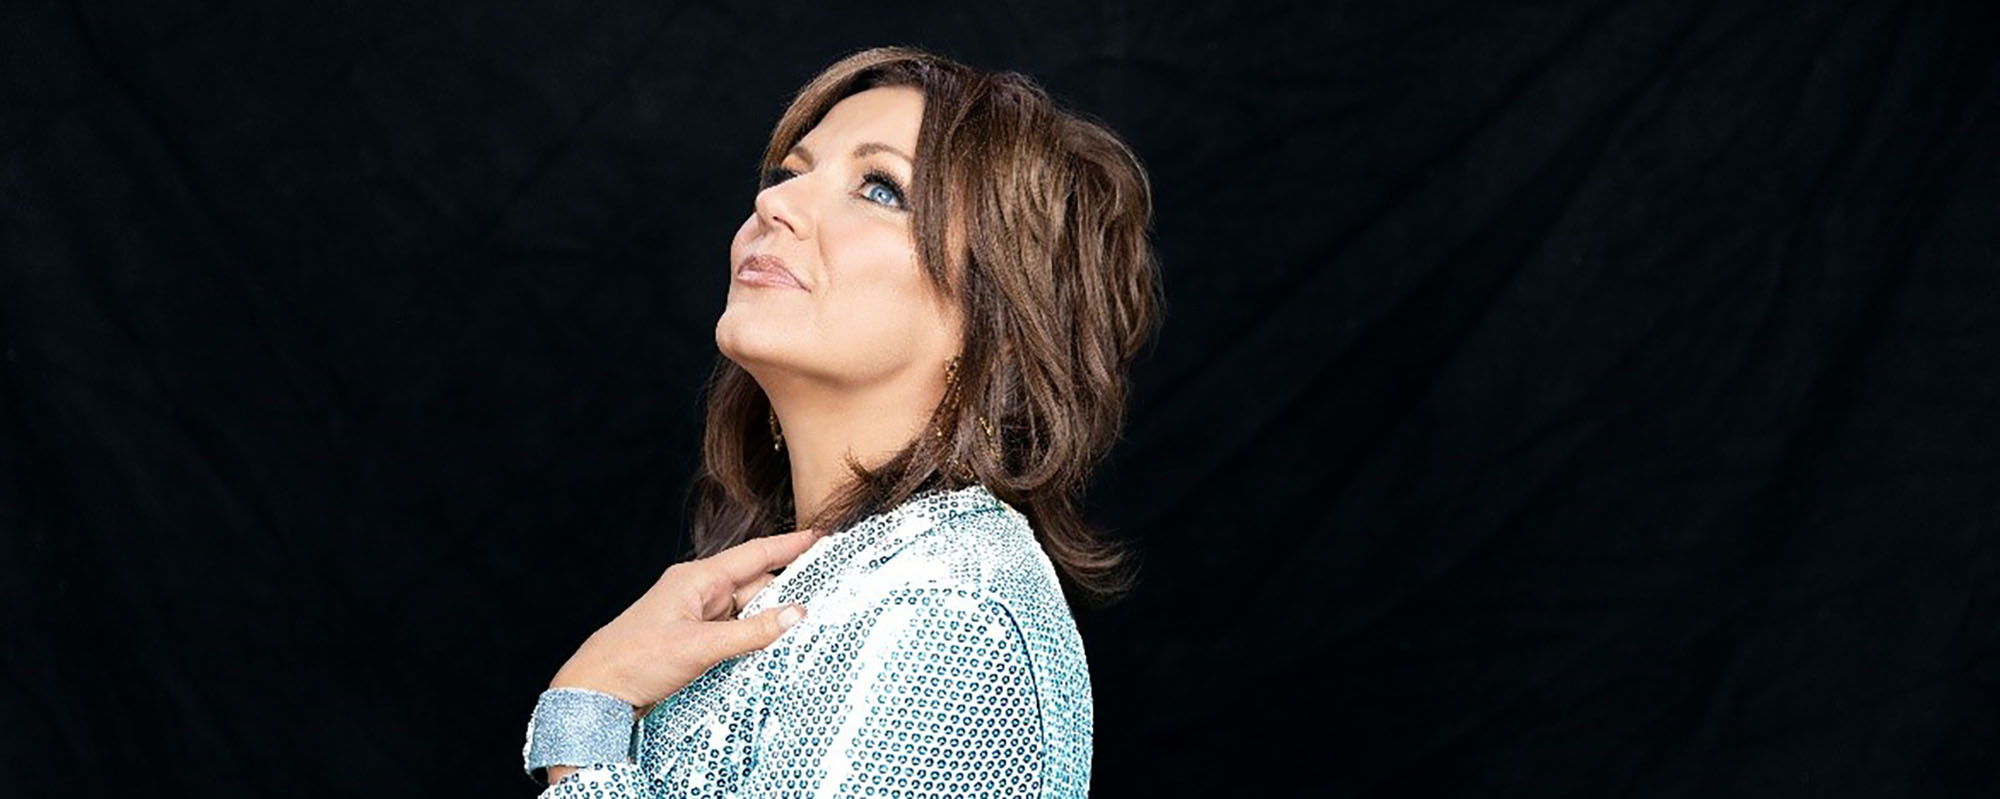 3 Songs You Didn’t Know Featured Martina McBride